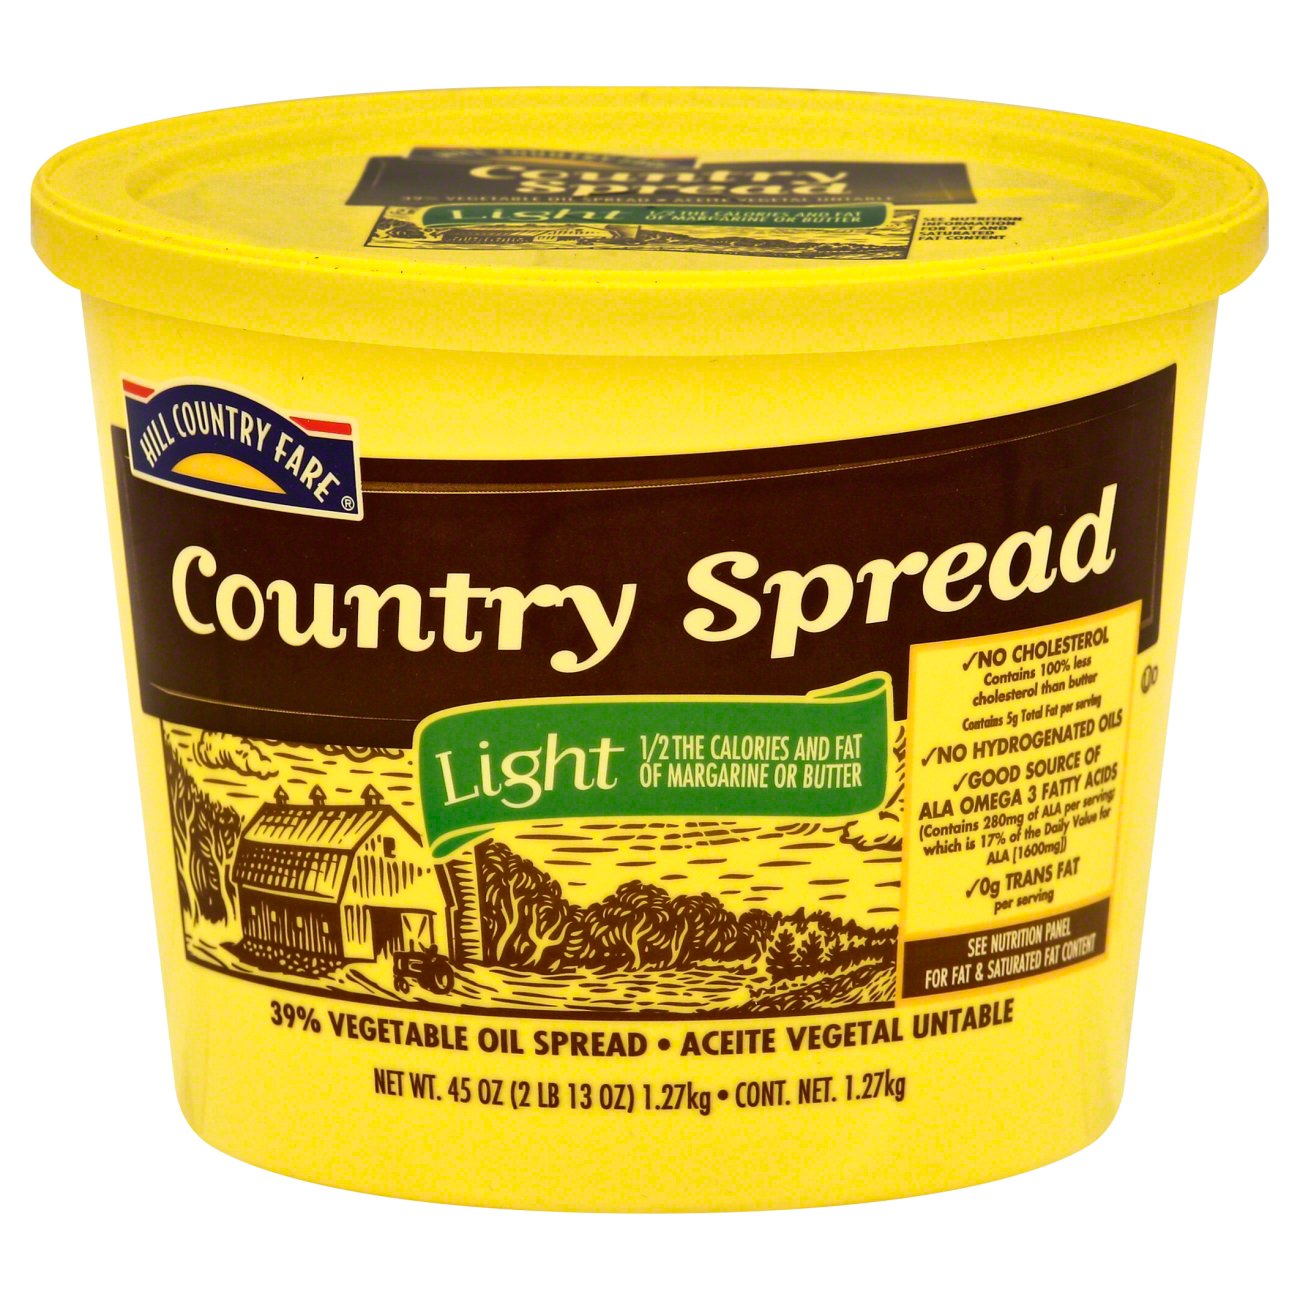 I Can't Believe It's Not Butter! Original Spray - Shop Butter & Margarine  at H-E-B